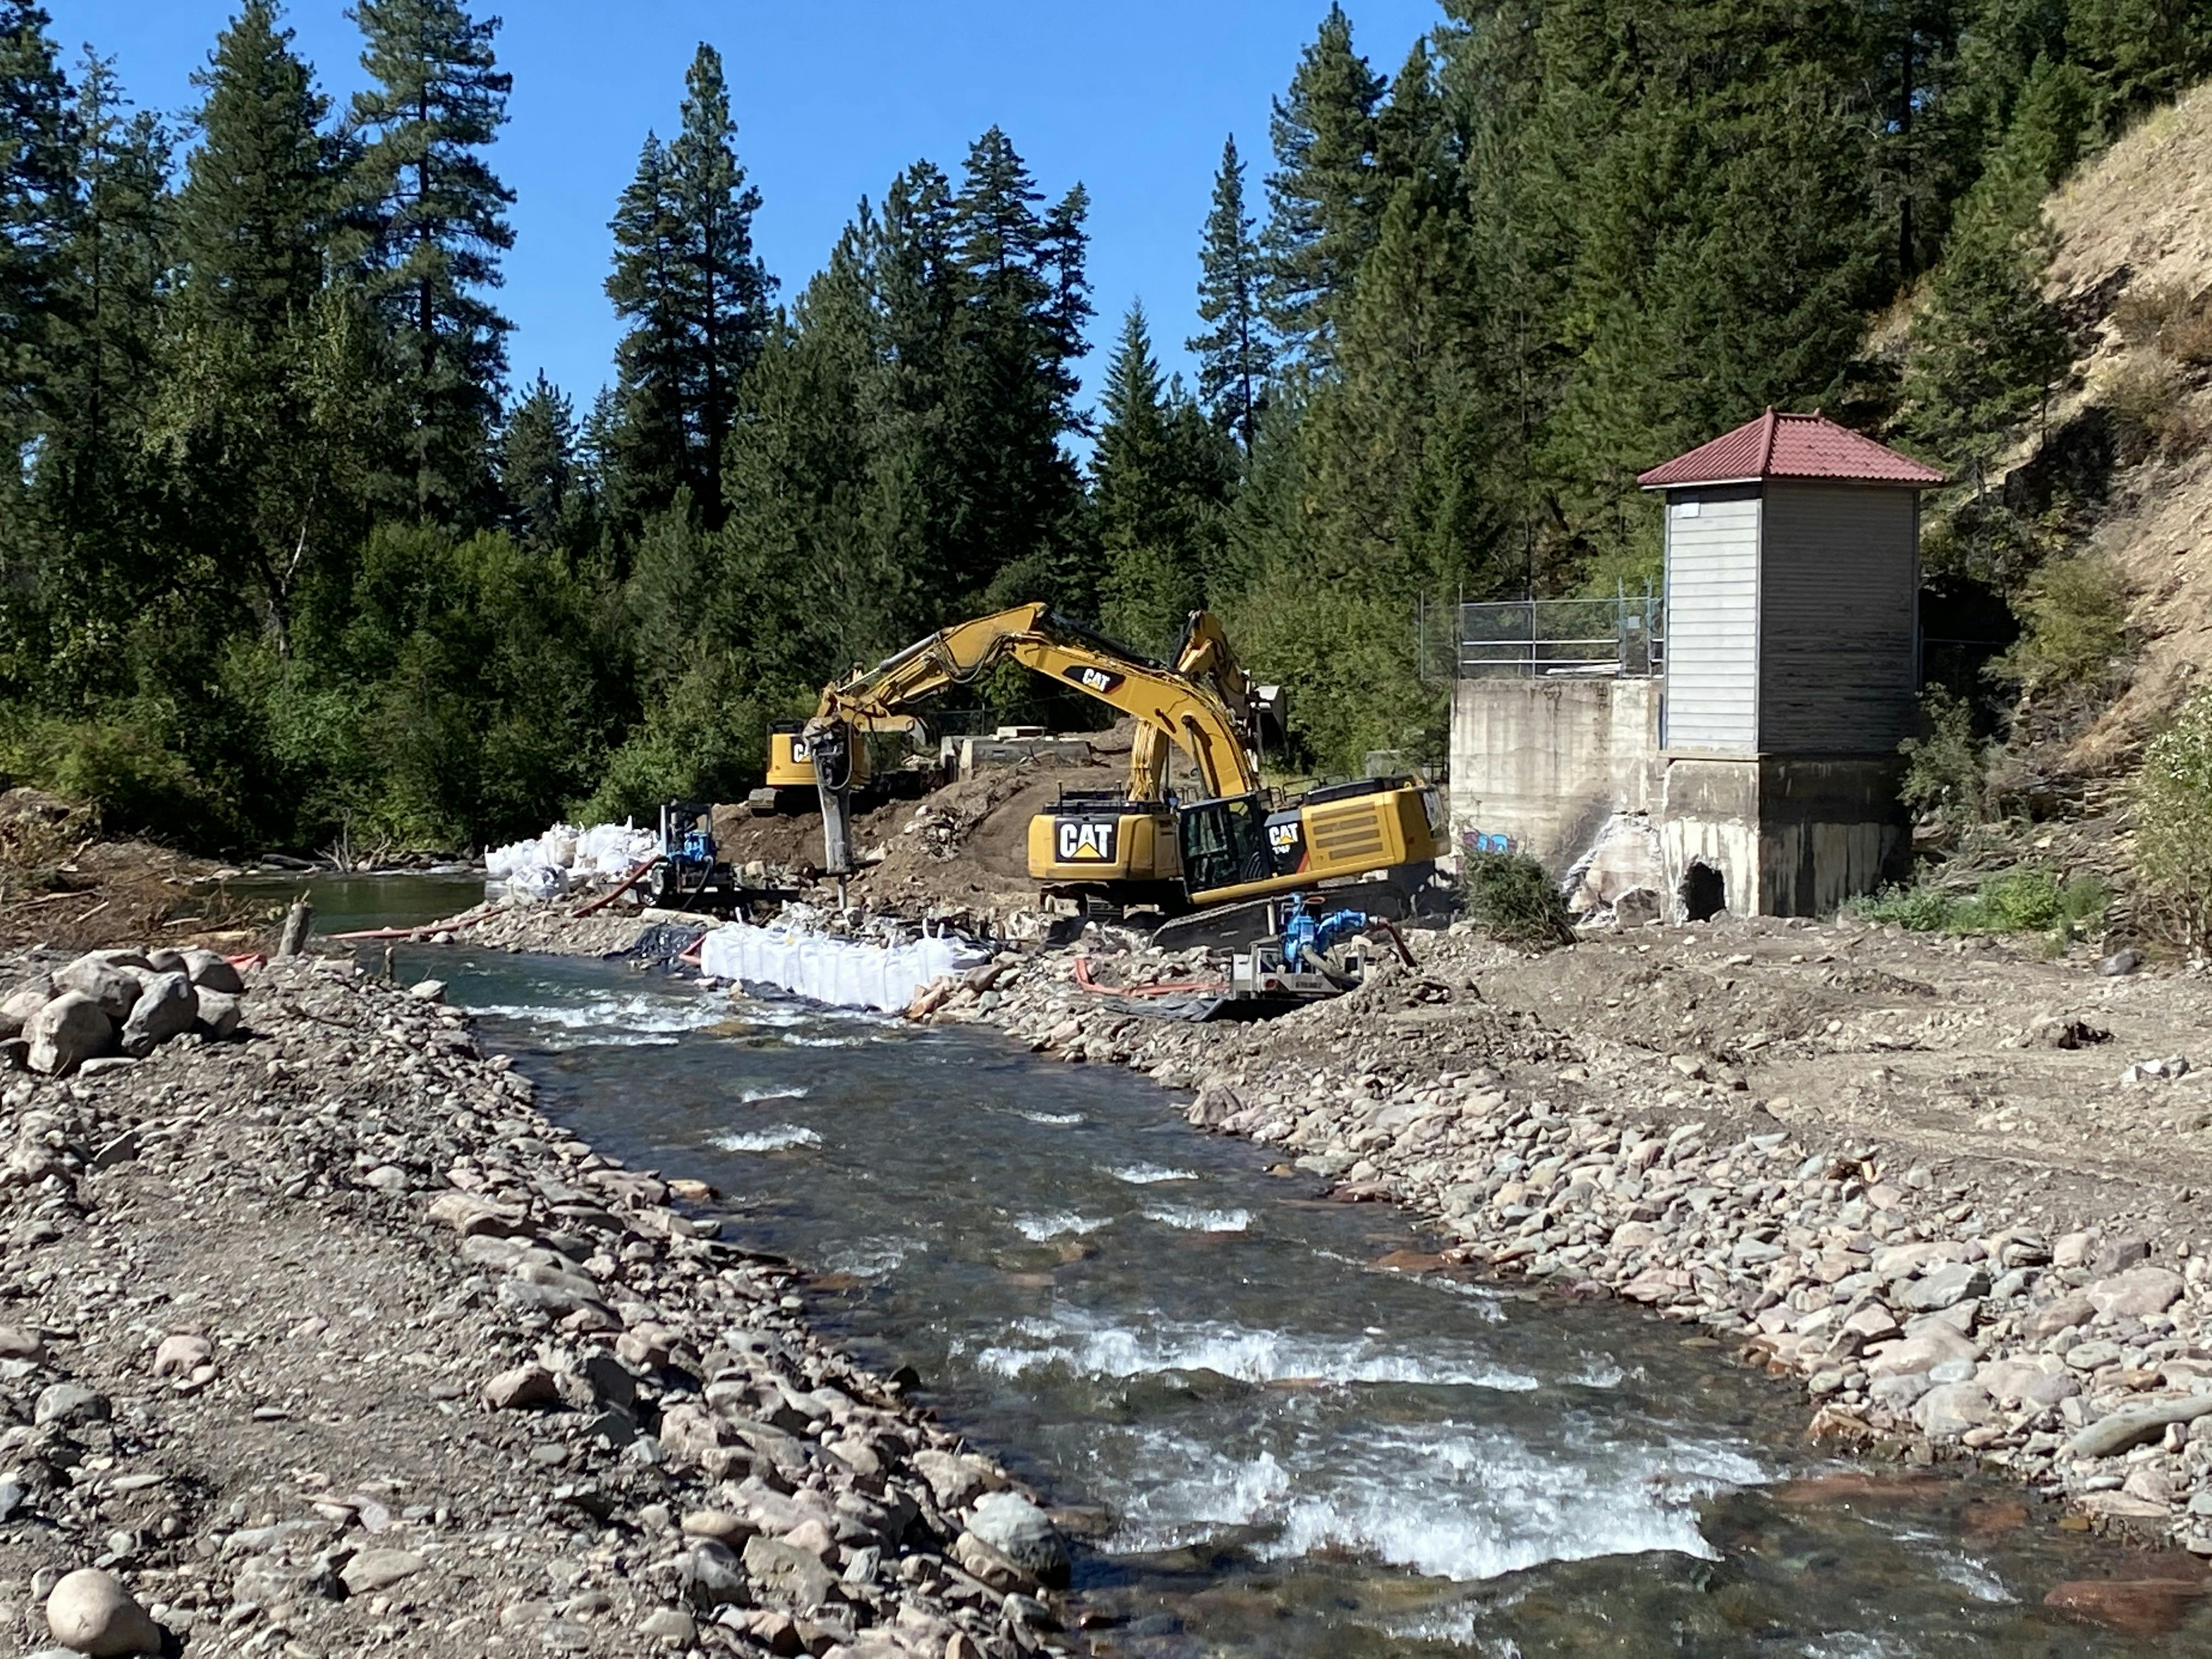 Dam structure removal w/creek view August 10, 2020